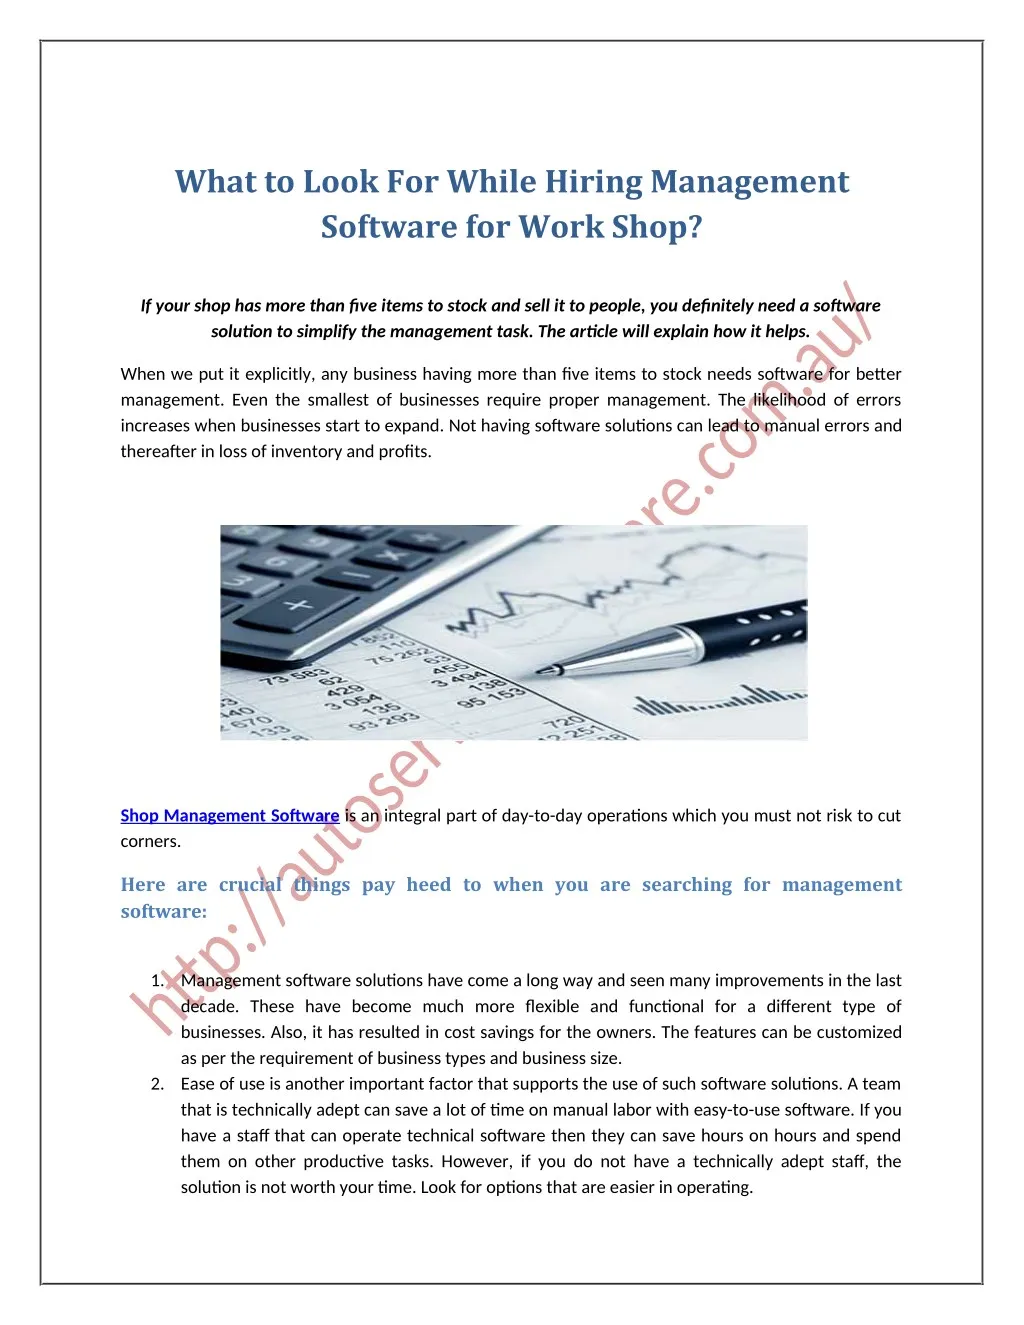 what to look for while hiring management software